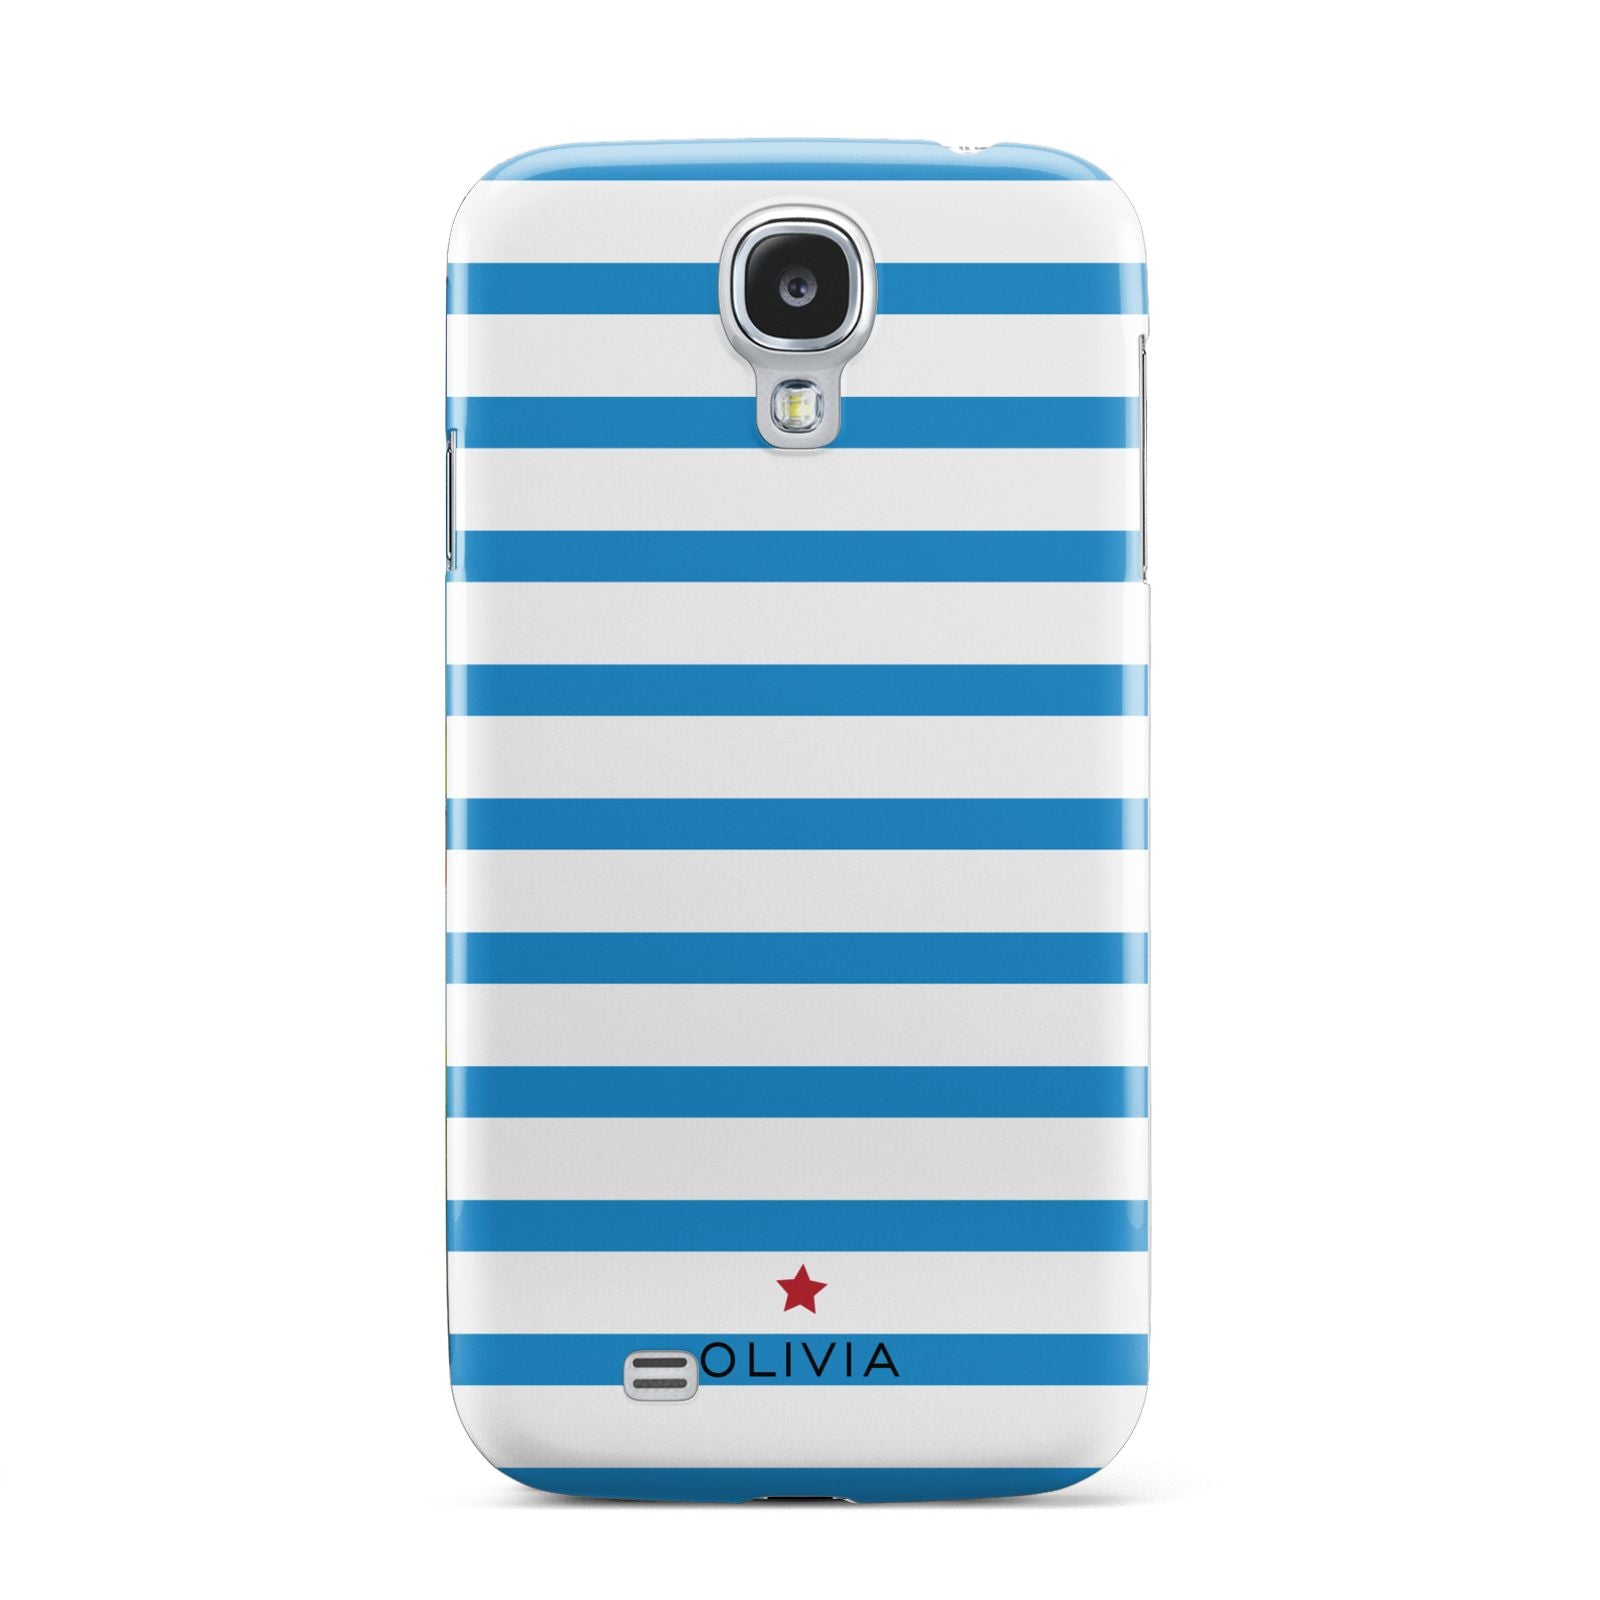 Personalised Name Blue White Samsung Galaxy S4 Case